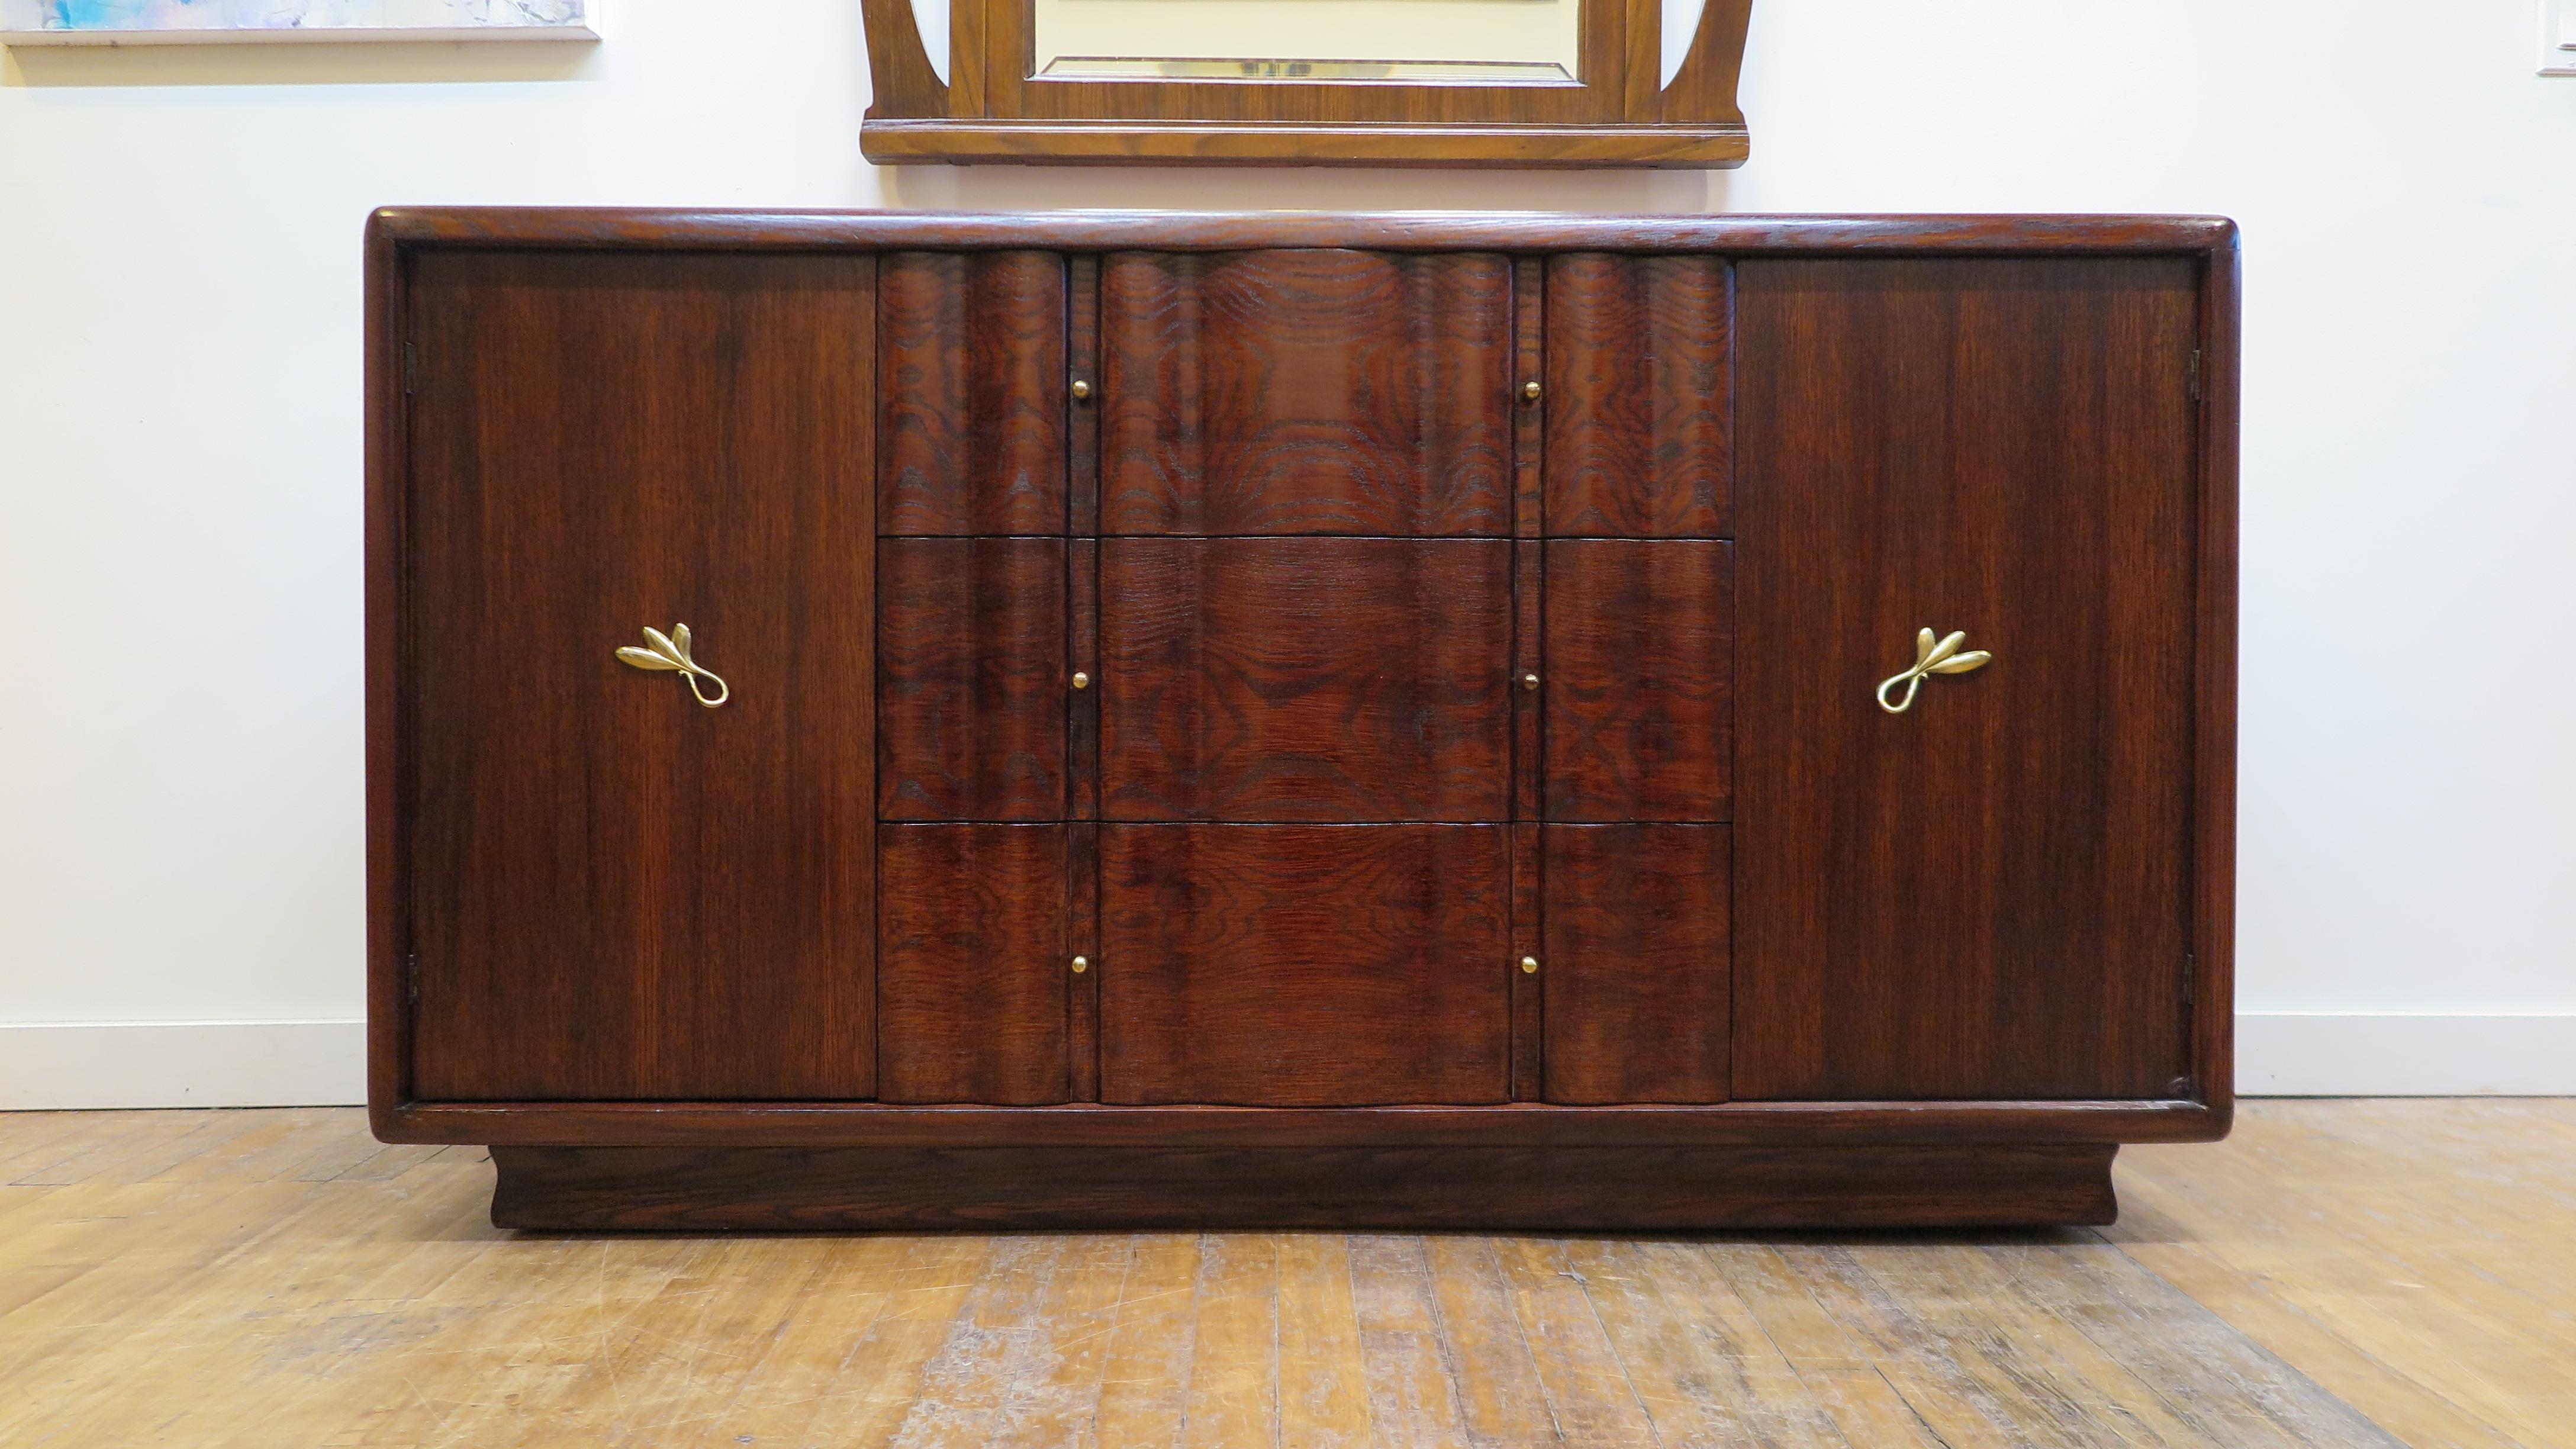 Art Deco Credenza sideboard. French inspired American Art Deco midcentury oak sideboard, 1940-1950. Waterfall edge case raised on plinth having three drawers, upper drawer with two flatware compartments, two cabinets for storage left and right.